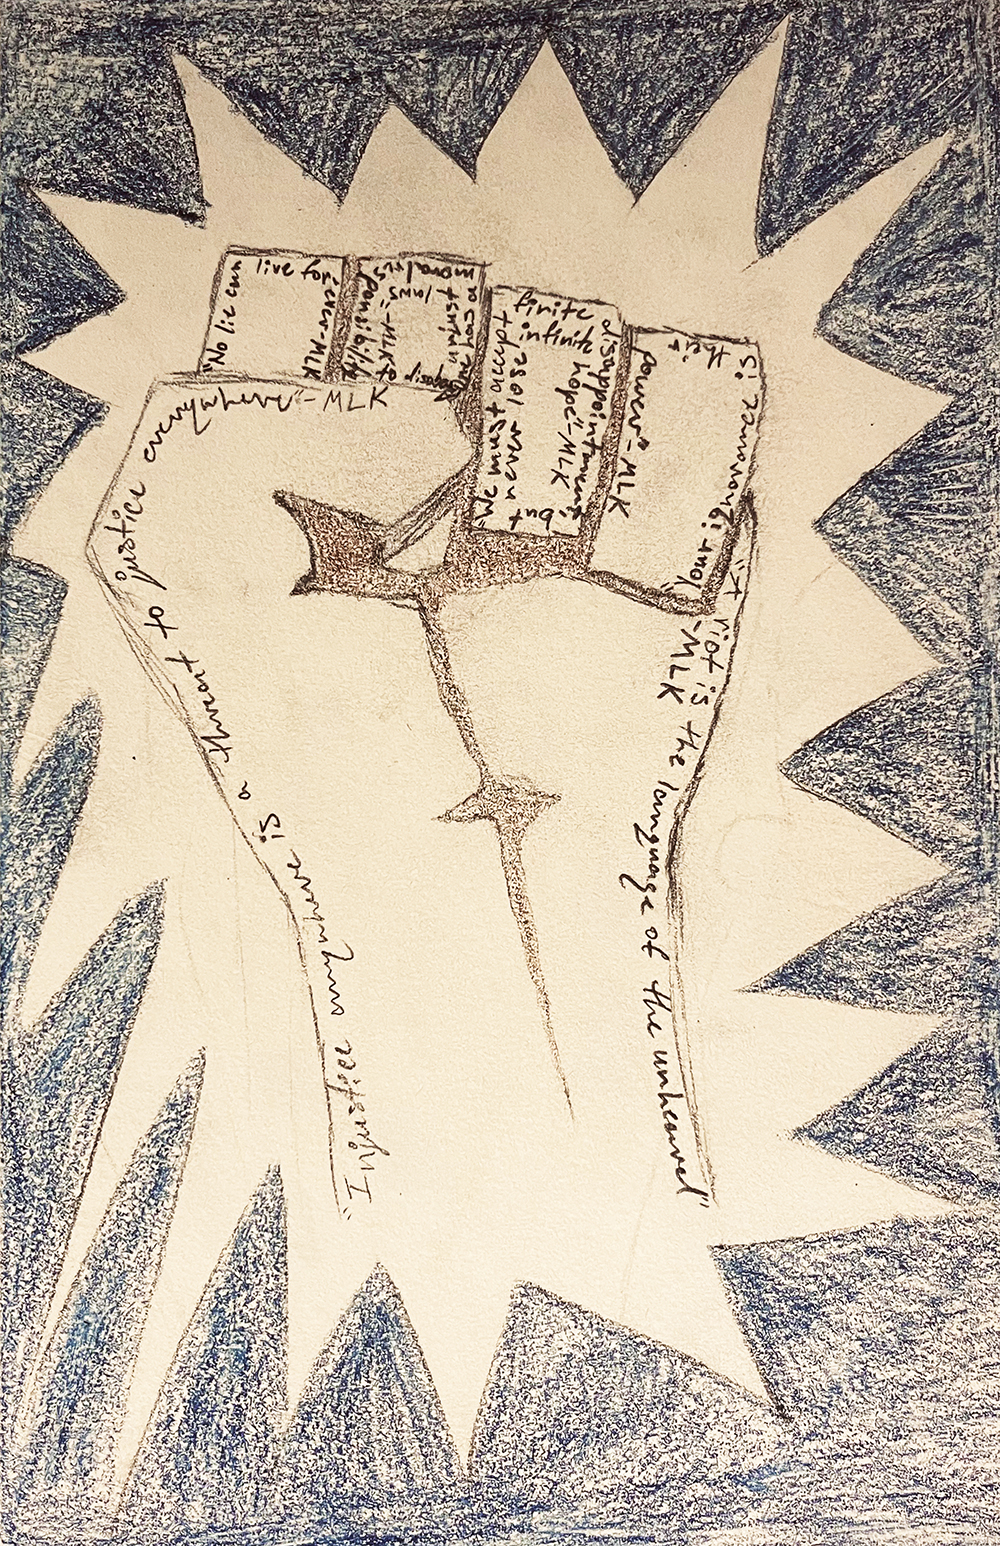 Contest submission titled "Black Power." A drawing of a clenched fist covered in words spoken by Dr. Martin Luther King, Jr. A white starburst on a blue-black background is behind the fist.